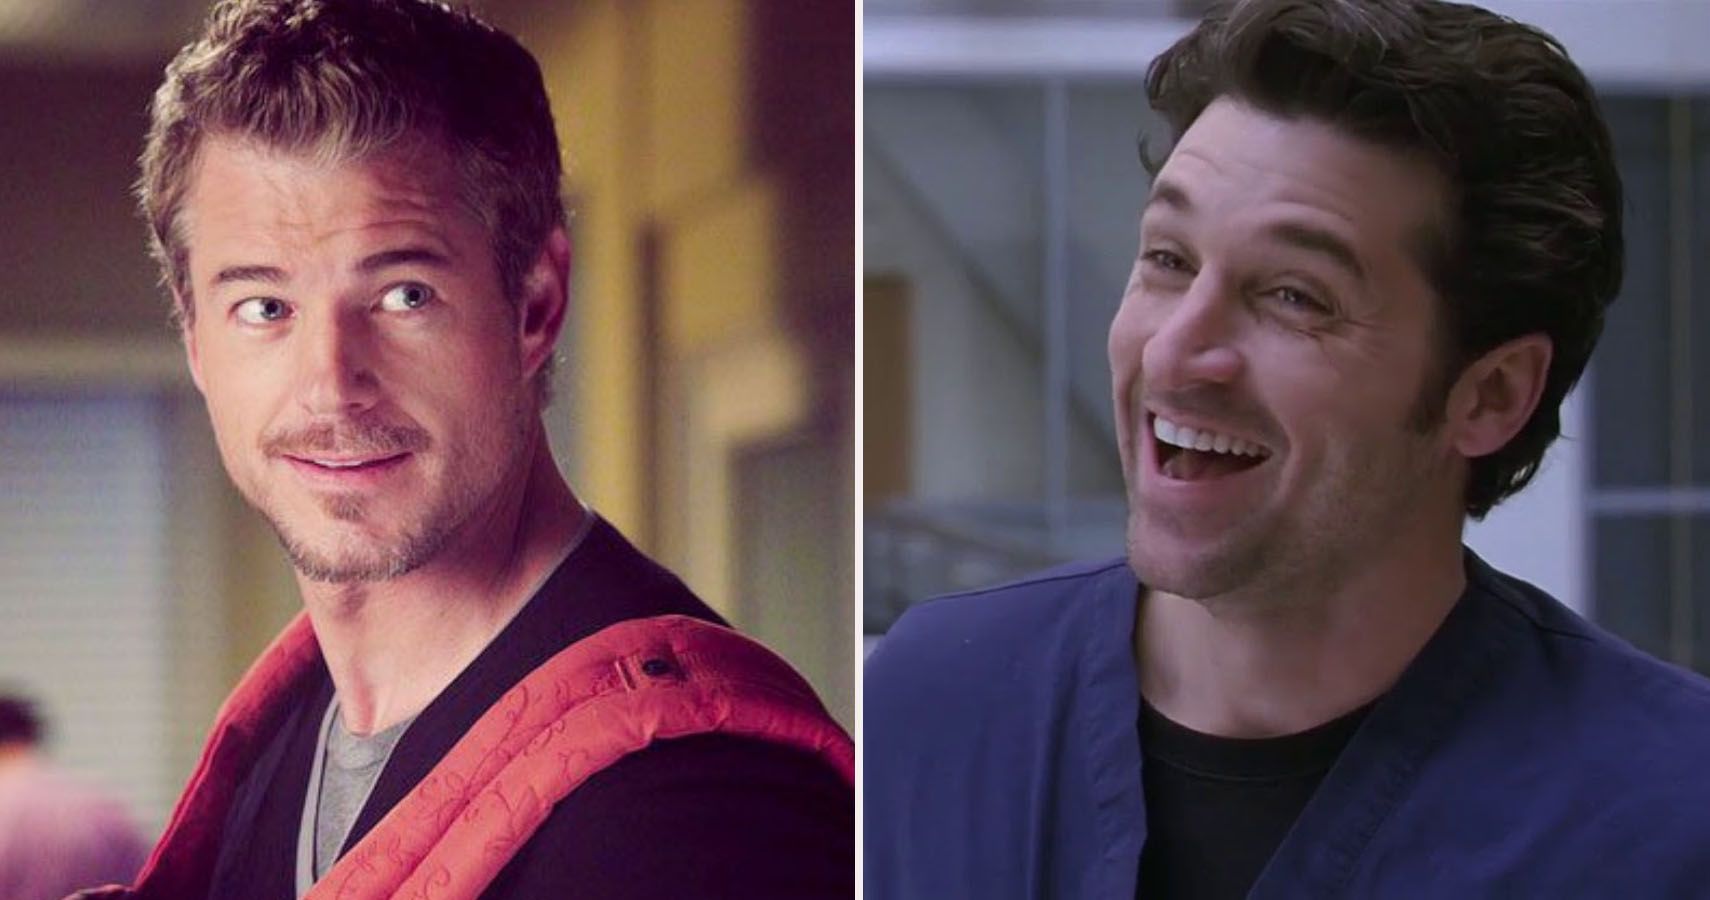 Ranked: The Guys Of Grey's Anatomy In Order Of Who We'd Date